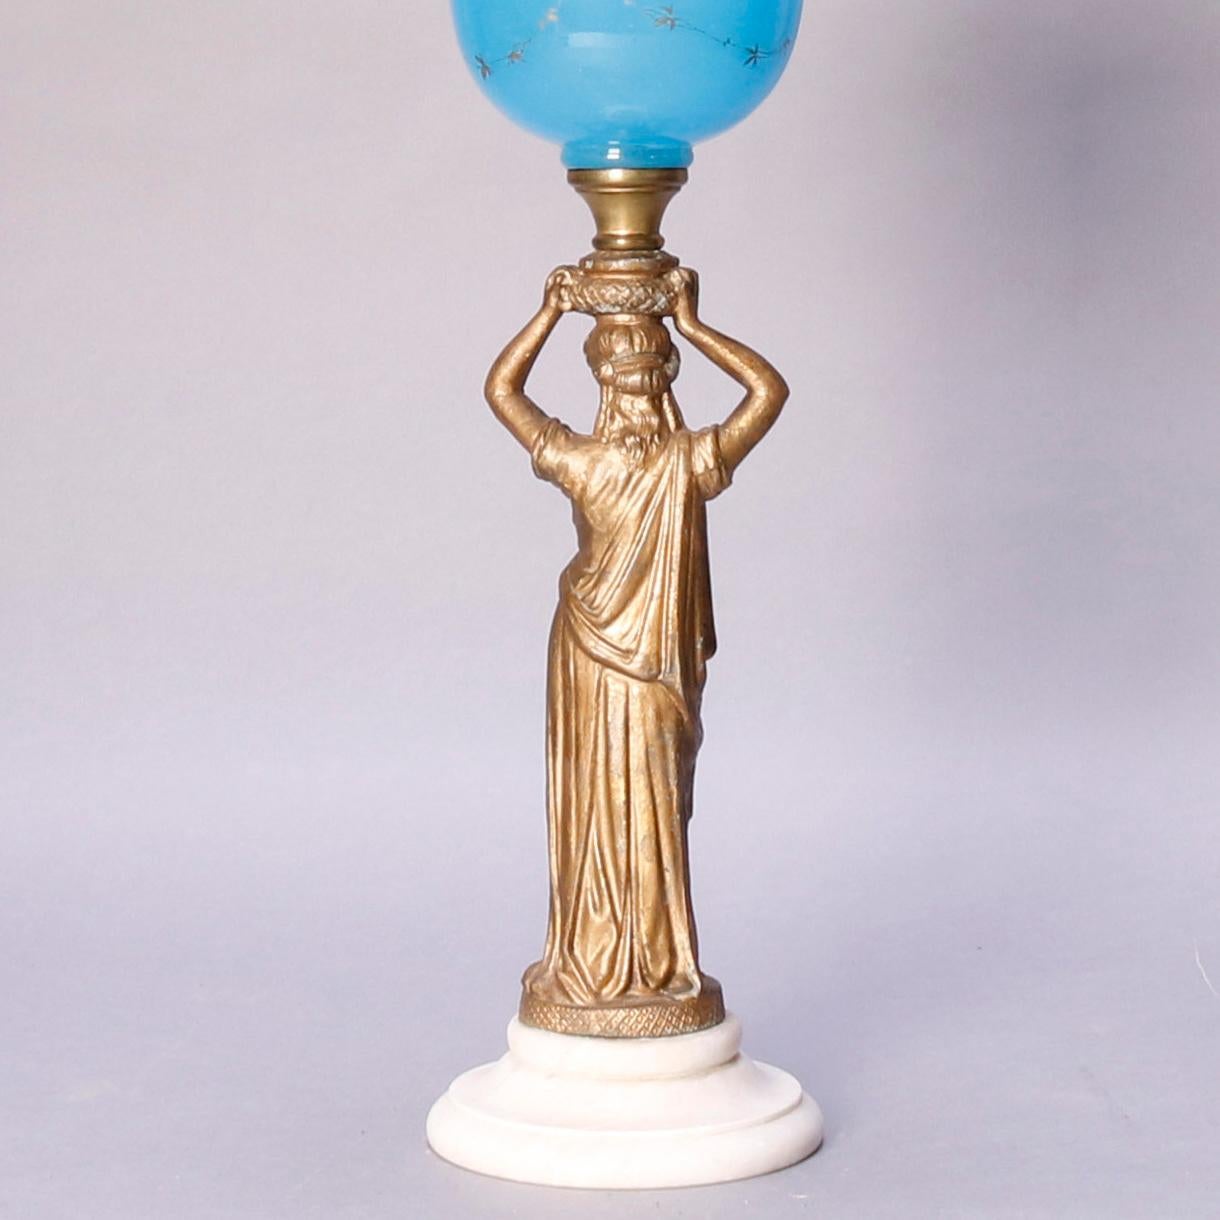 Antique Figural Bronze Gone with the Wind Gilt Art Glass Oil Lamp, circa 1890 6